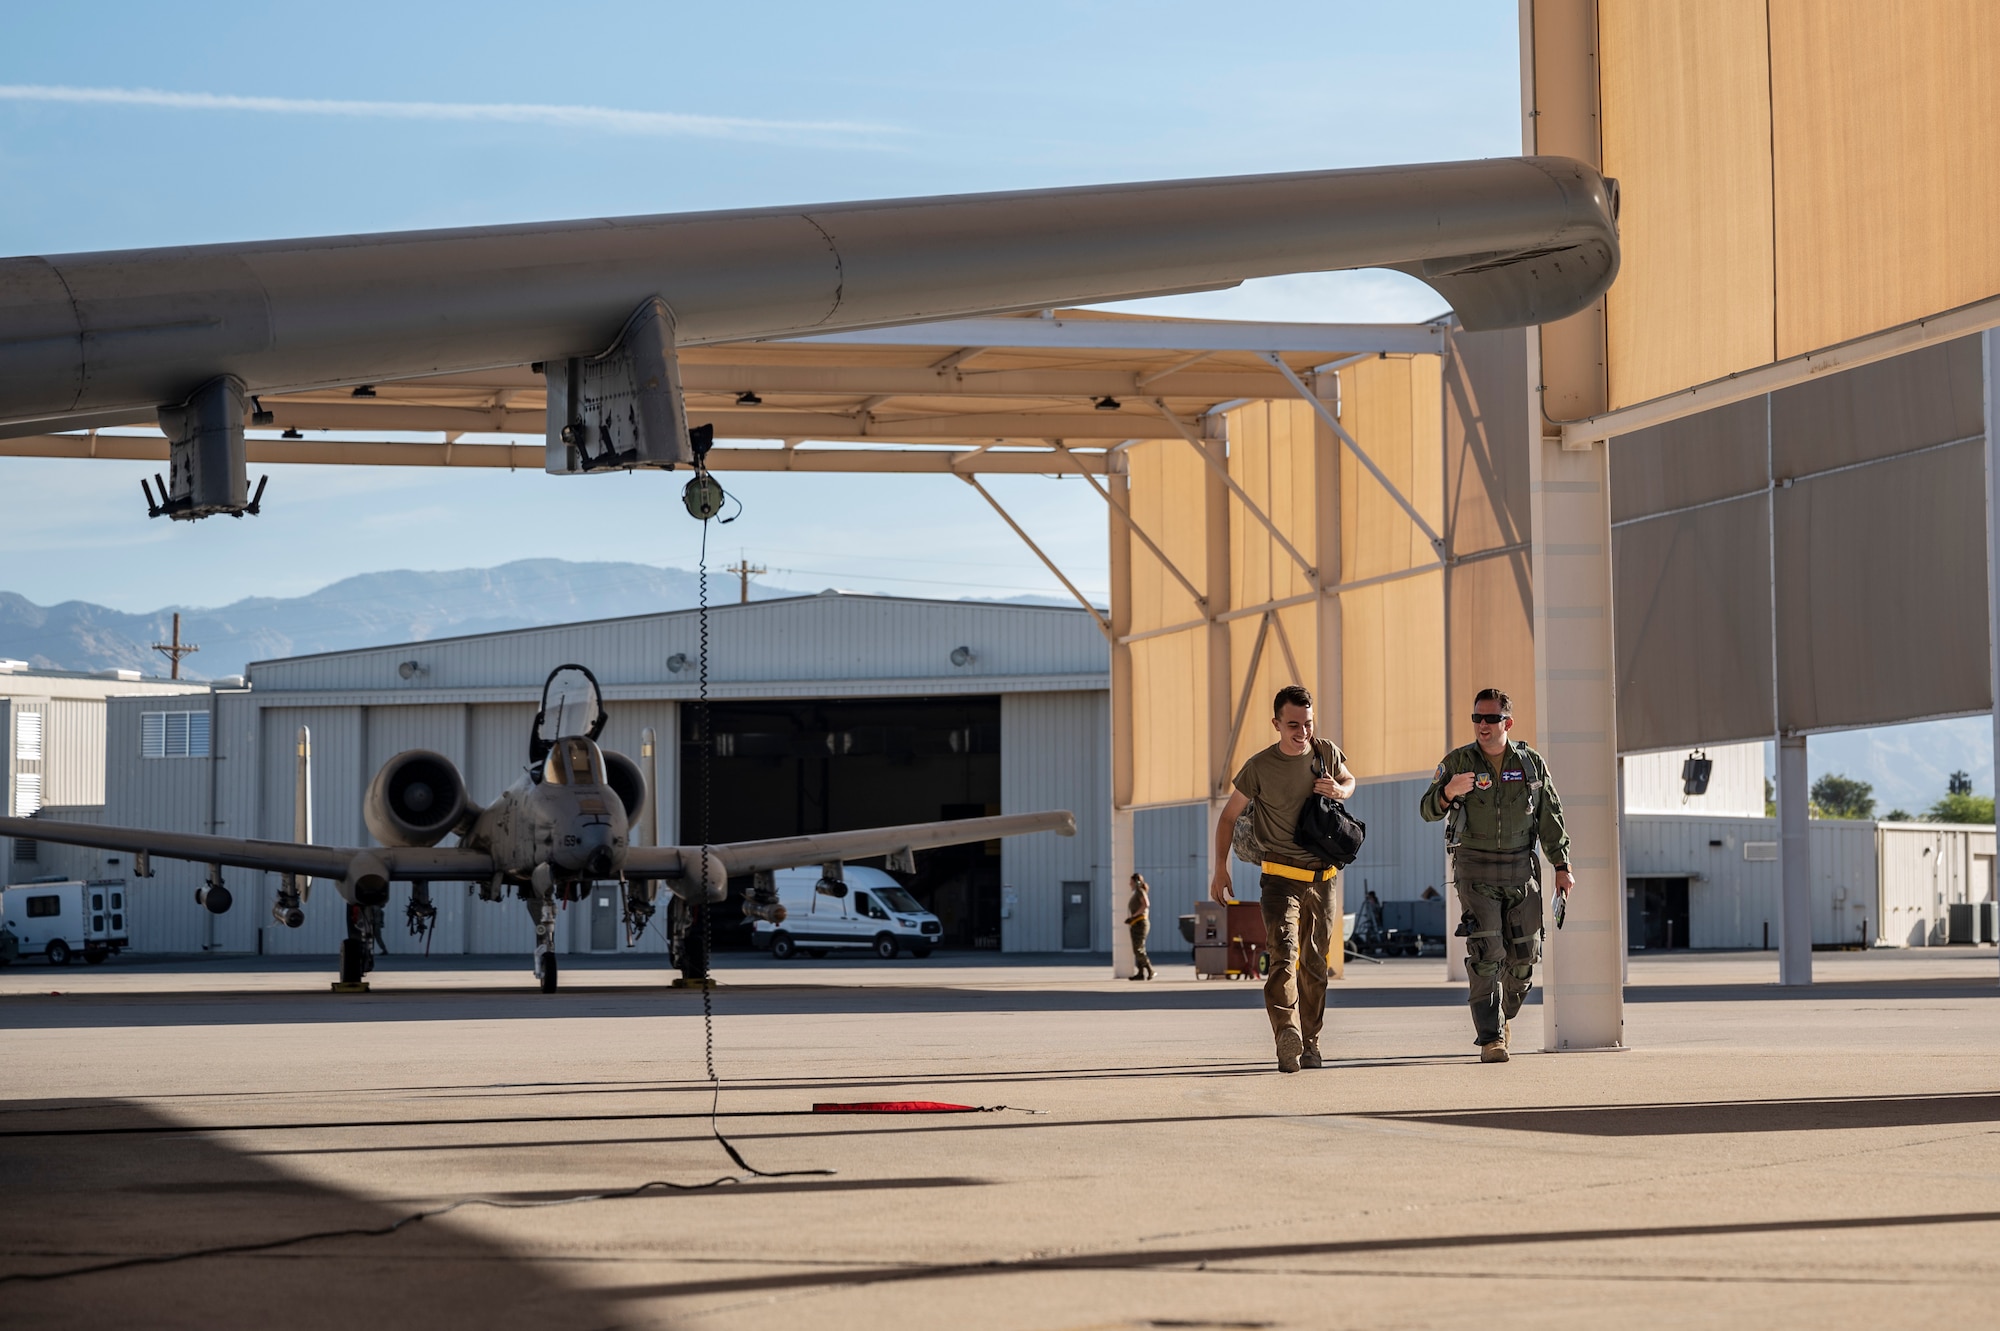 A photo of a pilot and a maintainer walking side by side on the flight line.